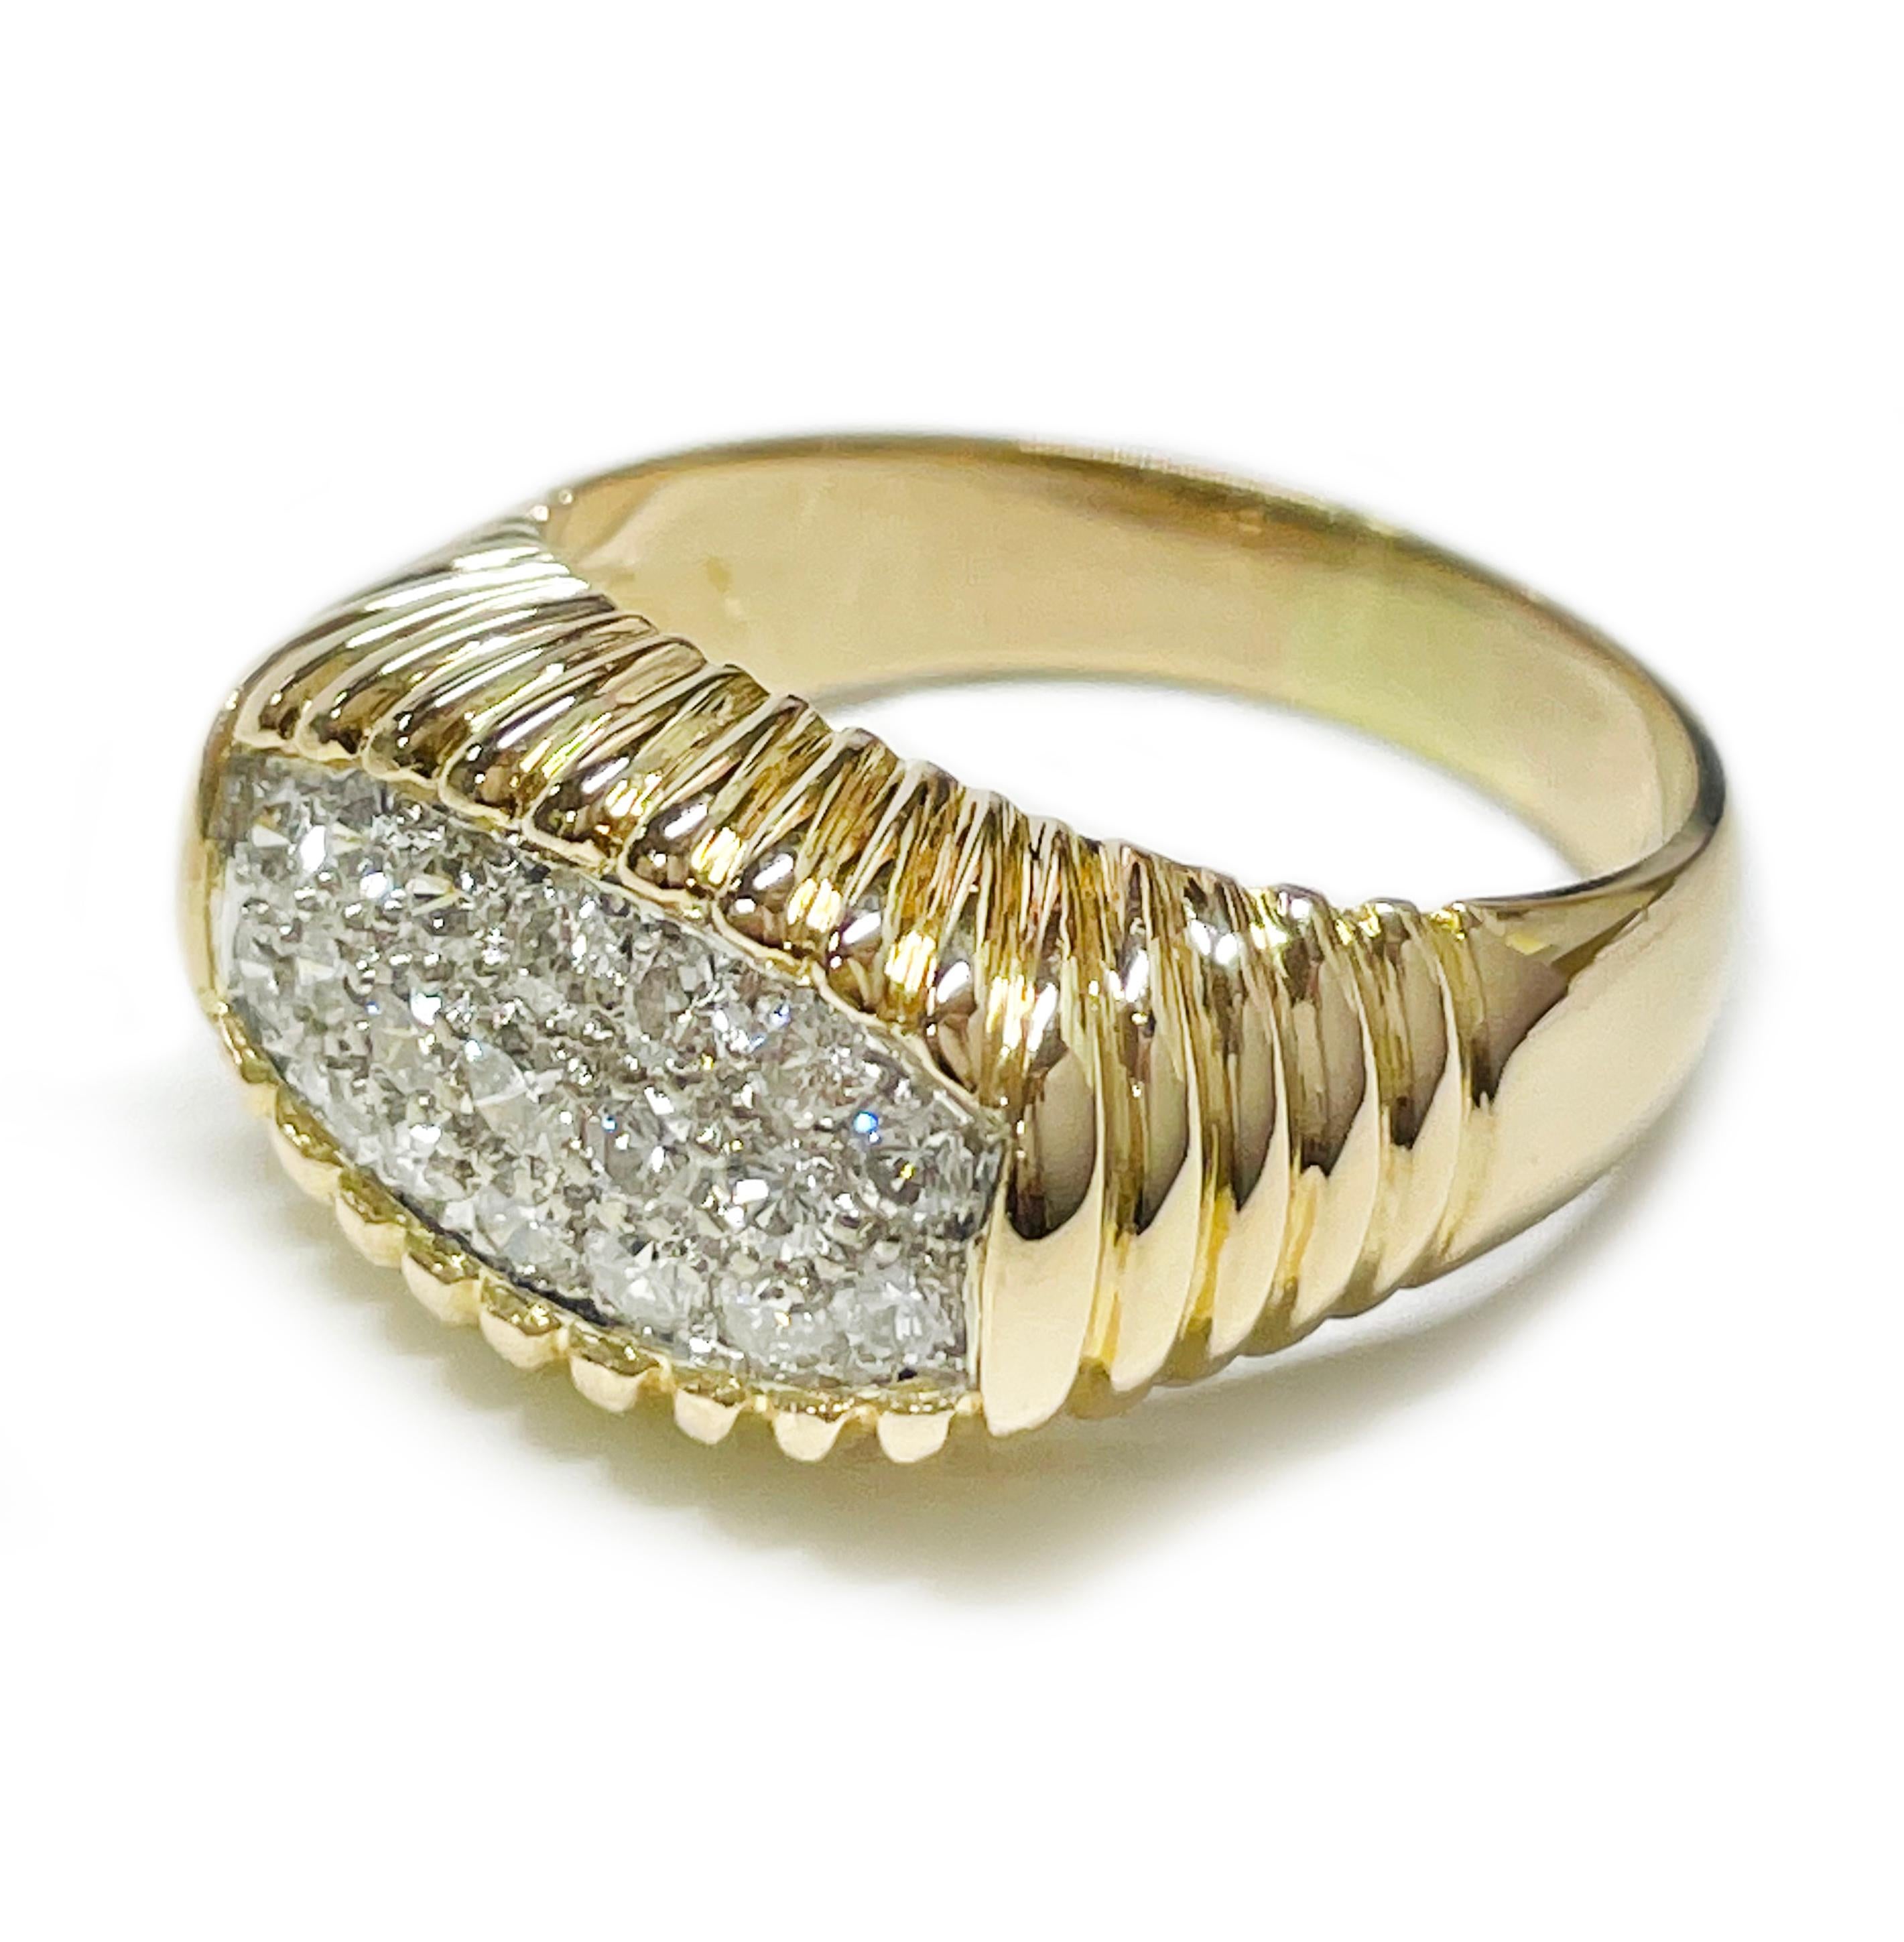 18 Karat Two-Tone White and Yellow Gold Diamond Pavé Ring. The ring features nineteen round pave brilliant-cut diamonds set in white gold. There are seventeen 2.0mm diamonds with a carat weight 0.51ctw, and two 2.5mm diamonds with a carat weight of